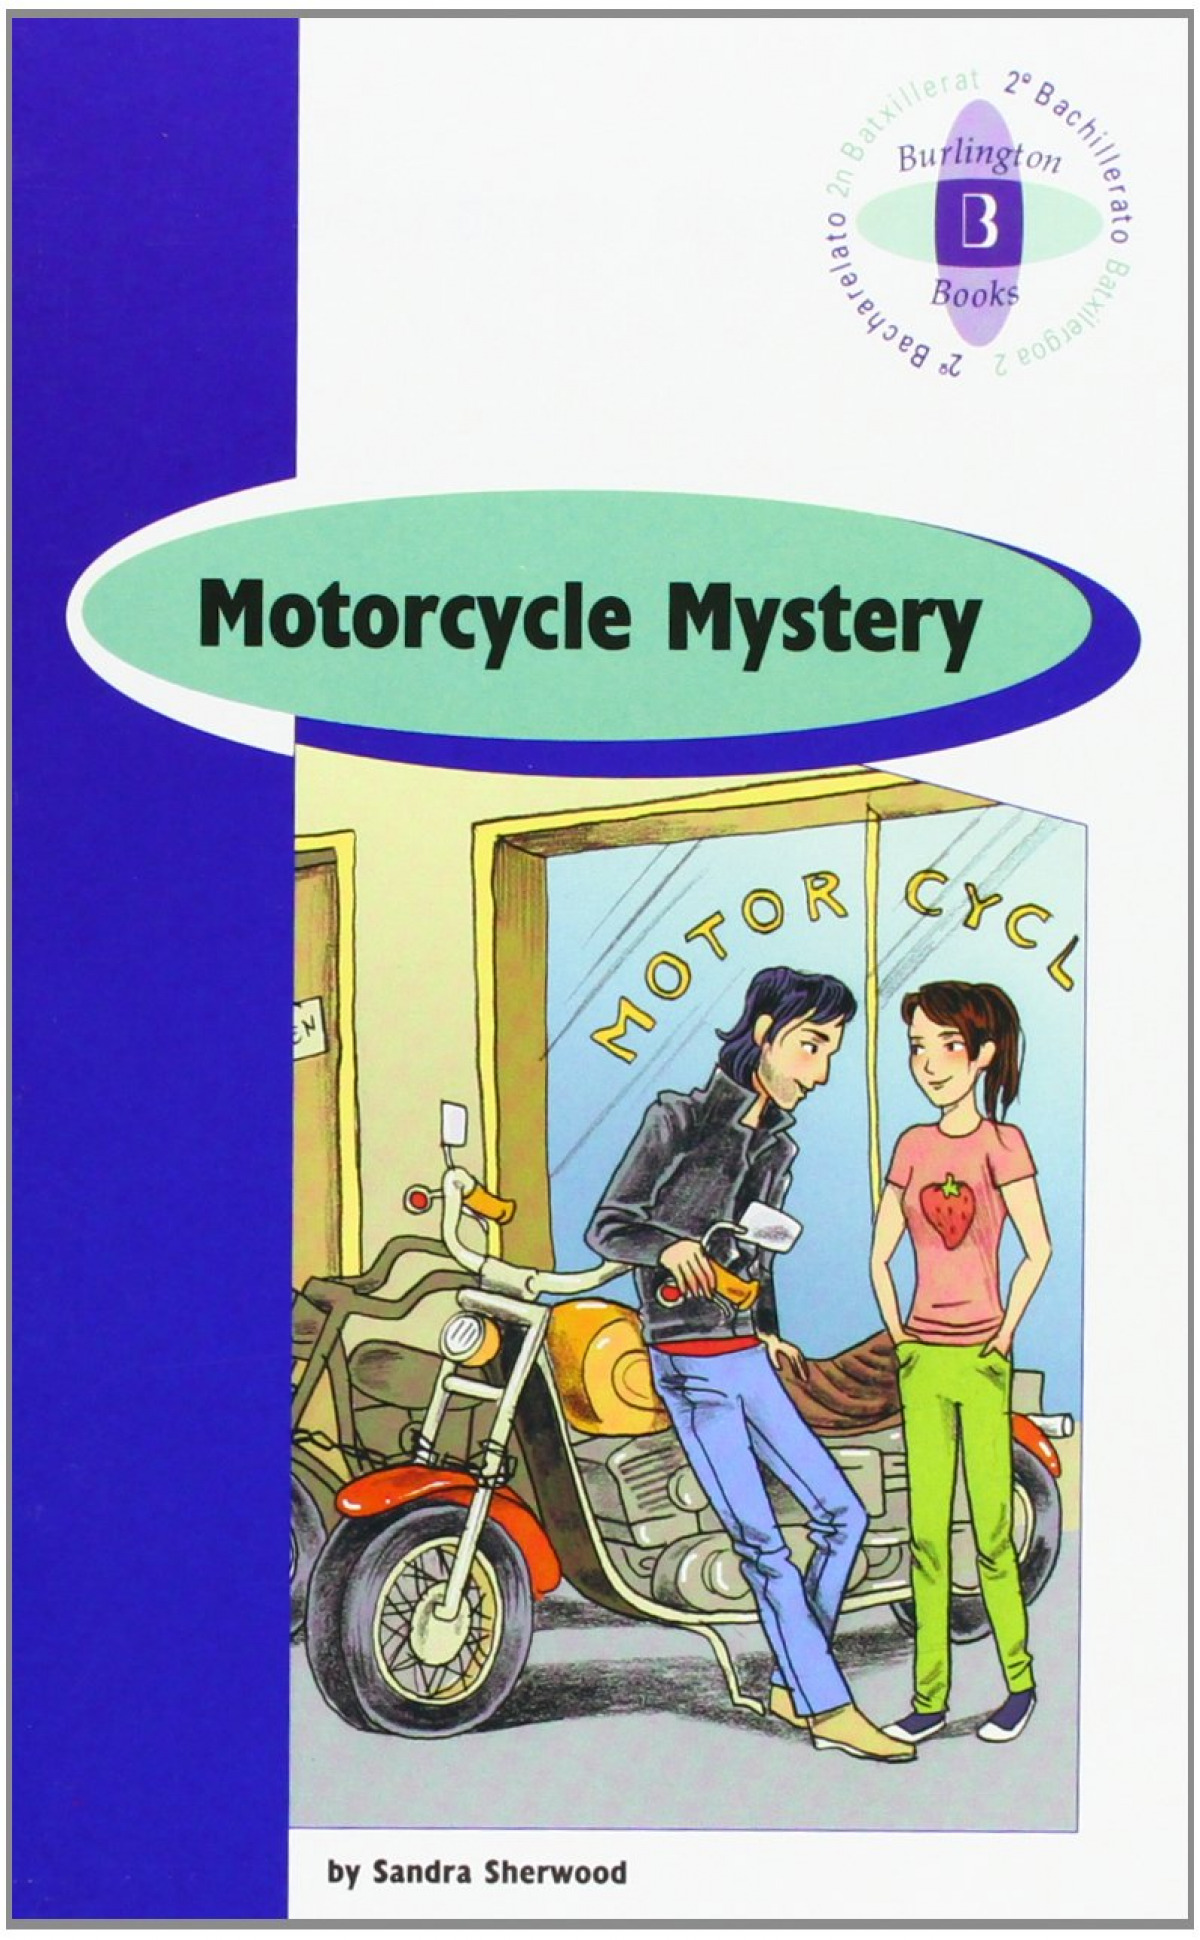 Motorcycle mystery